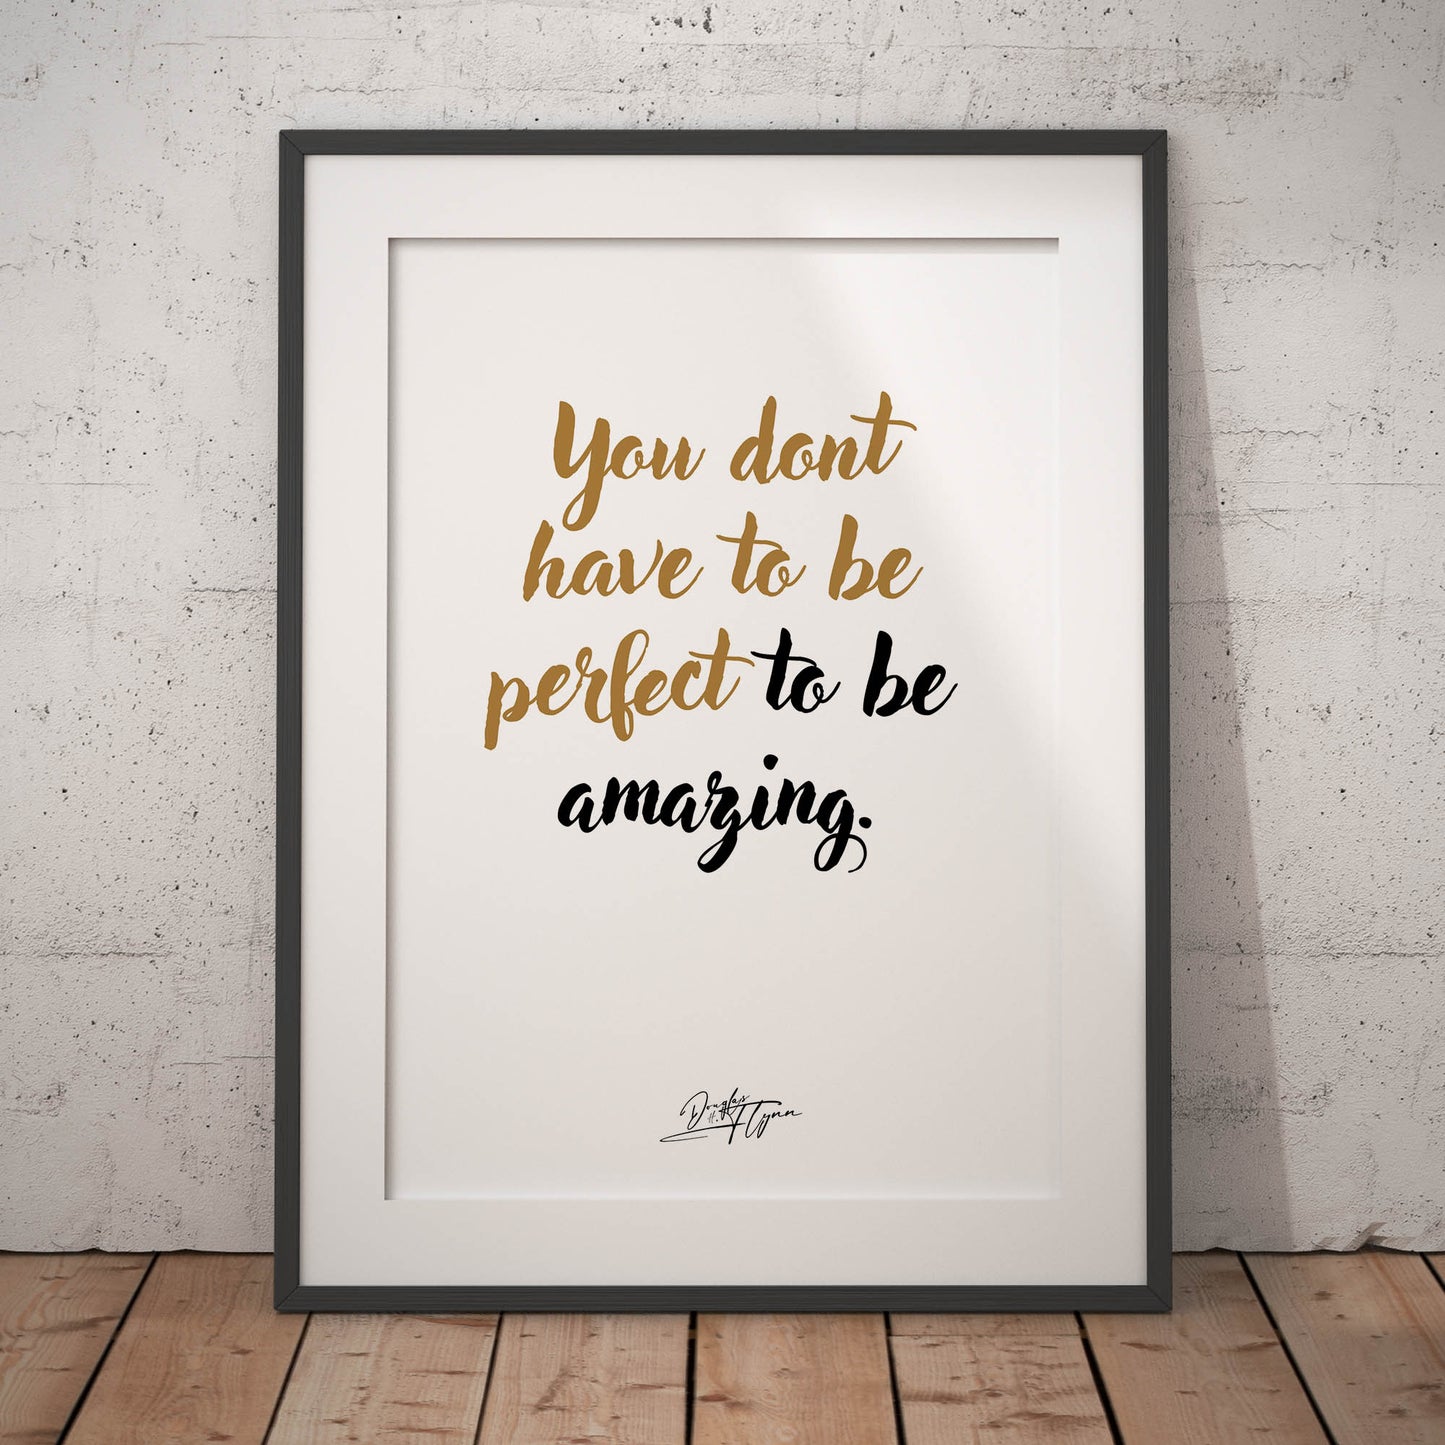 »You don't have to be perfect«